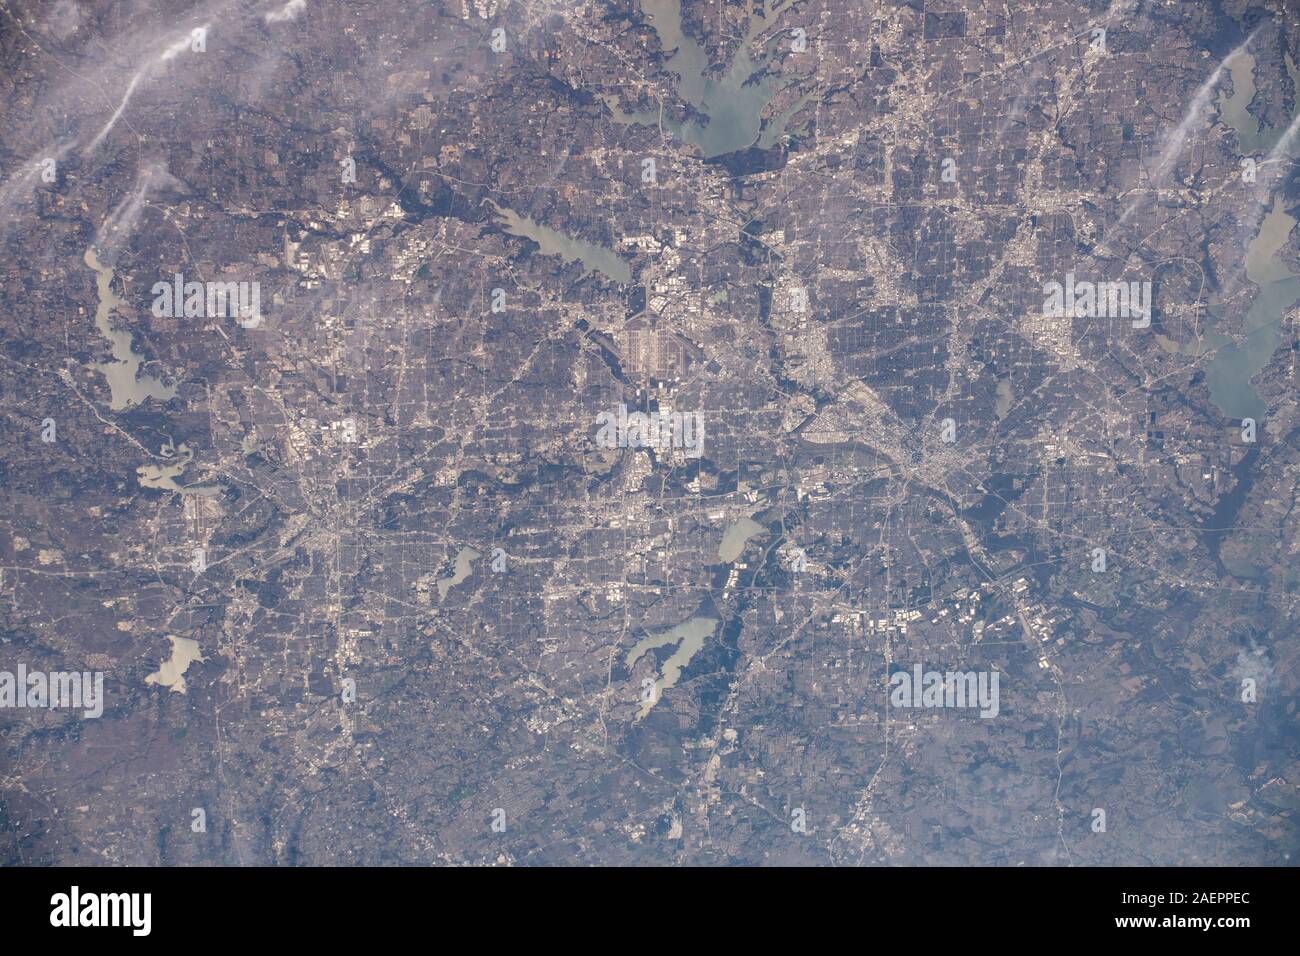 The Dallas-Fort Worth, Texas metropolitan area is pictured along with such landmarks as DFW International Airport and Dallas Love Field Airport as seem from the International Space Station orbiting 258 miles above the state of Texas December 6, 2019 in Earth Orbit. Several bodies of water are pictured including Joe Pool Lake, Mountain Creek Lake, White Rock Lake, Lake Ray Hubbard, Lewisville Lake and Grapevine Lake among others. Stock Photo